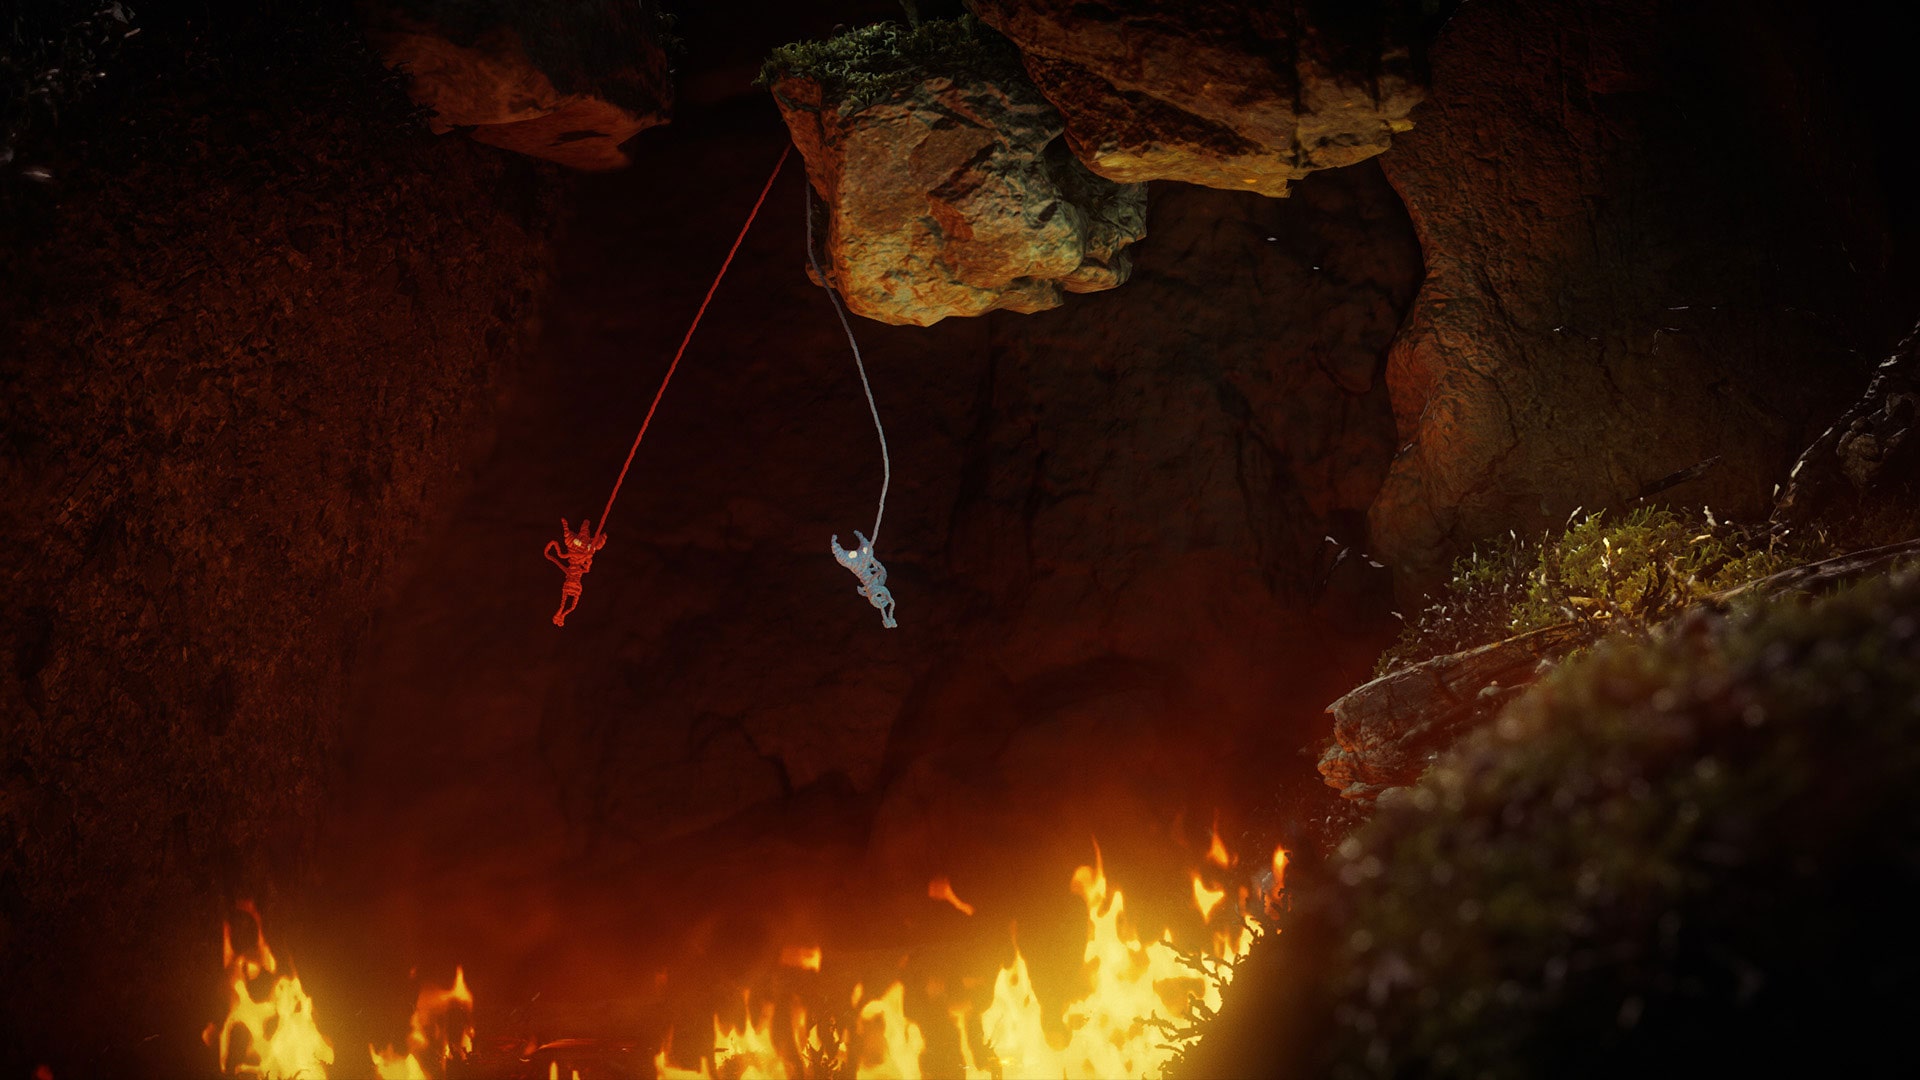 PS4 Unravel Two [Download] 